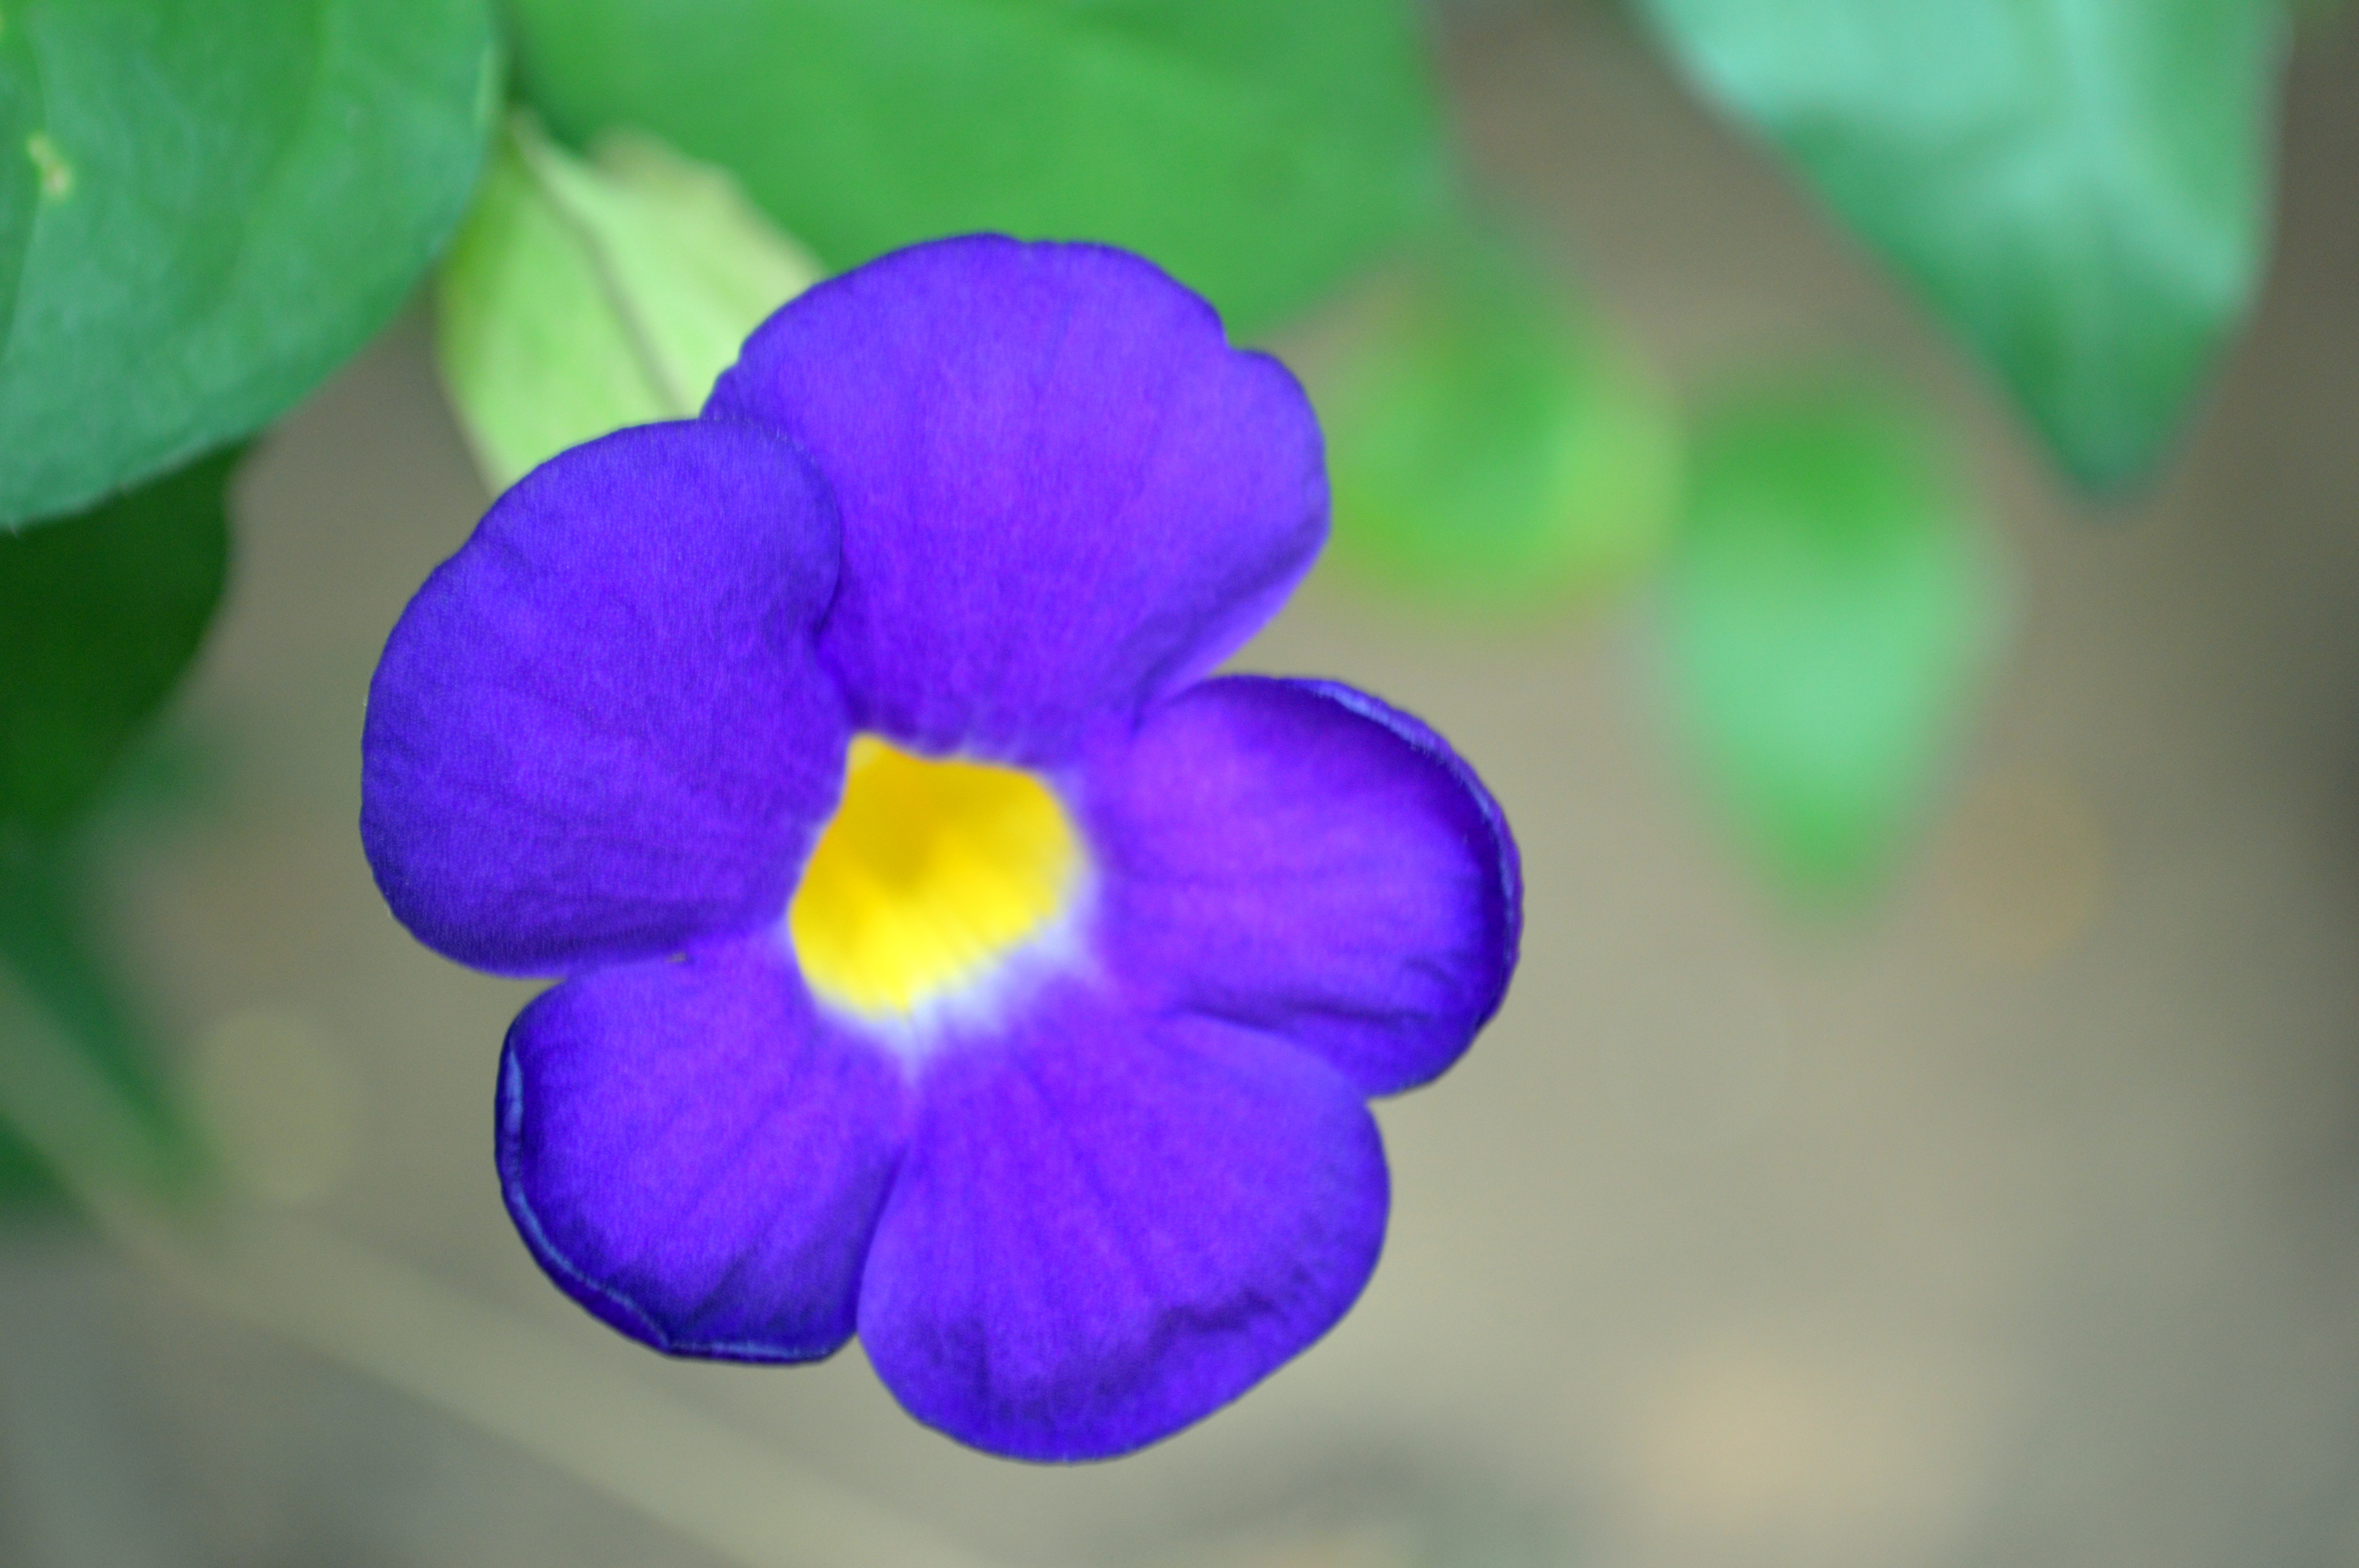 File:Purple flower with 5 petals.JPG - Wikimedia Commons